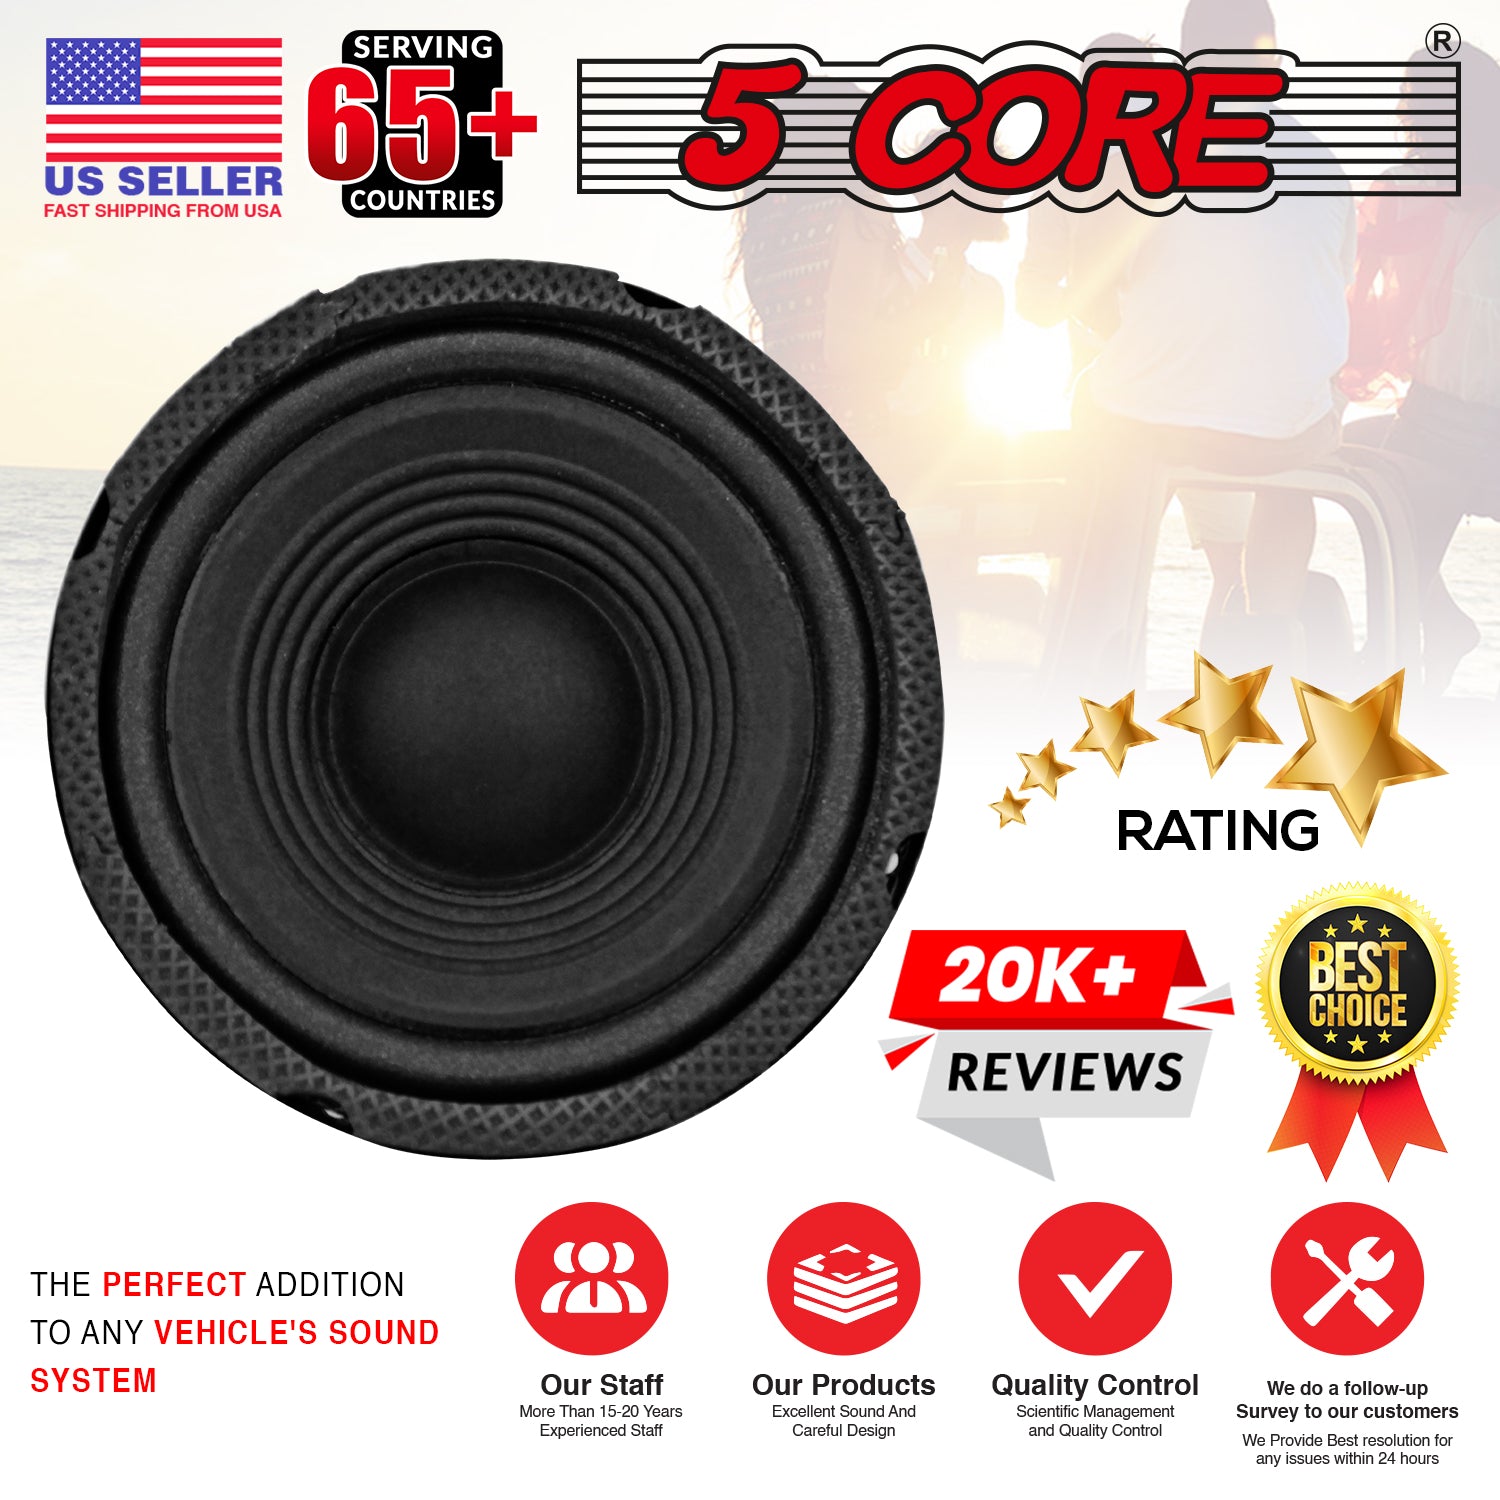 5 Core 5 Inch Subwoofer Car Speaker 20W RMS Mid Range DJ Sub Woofer 4 Ohm Premium Magnet Raw Replacement Stereo Subwoofers - CS-05 MR Pair